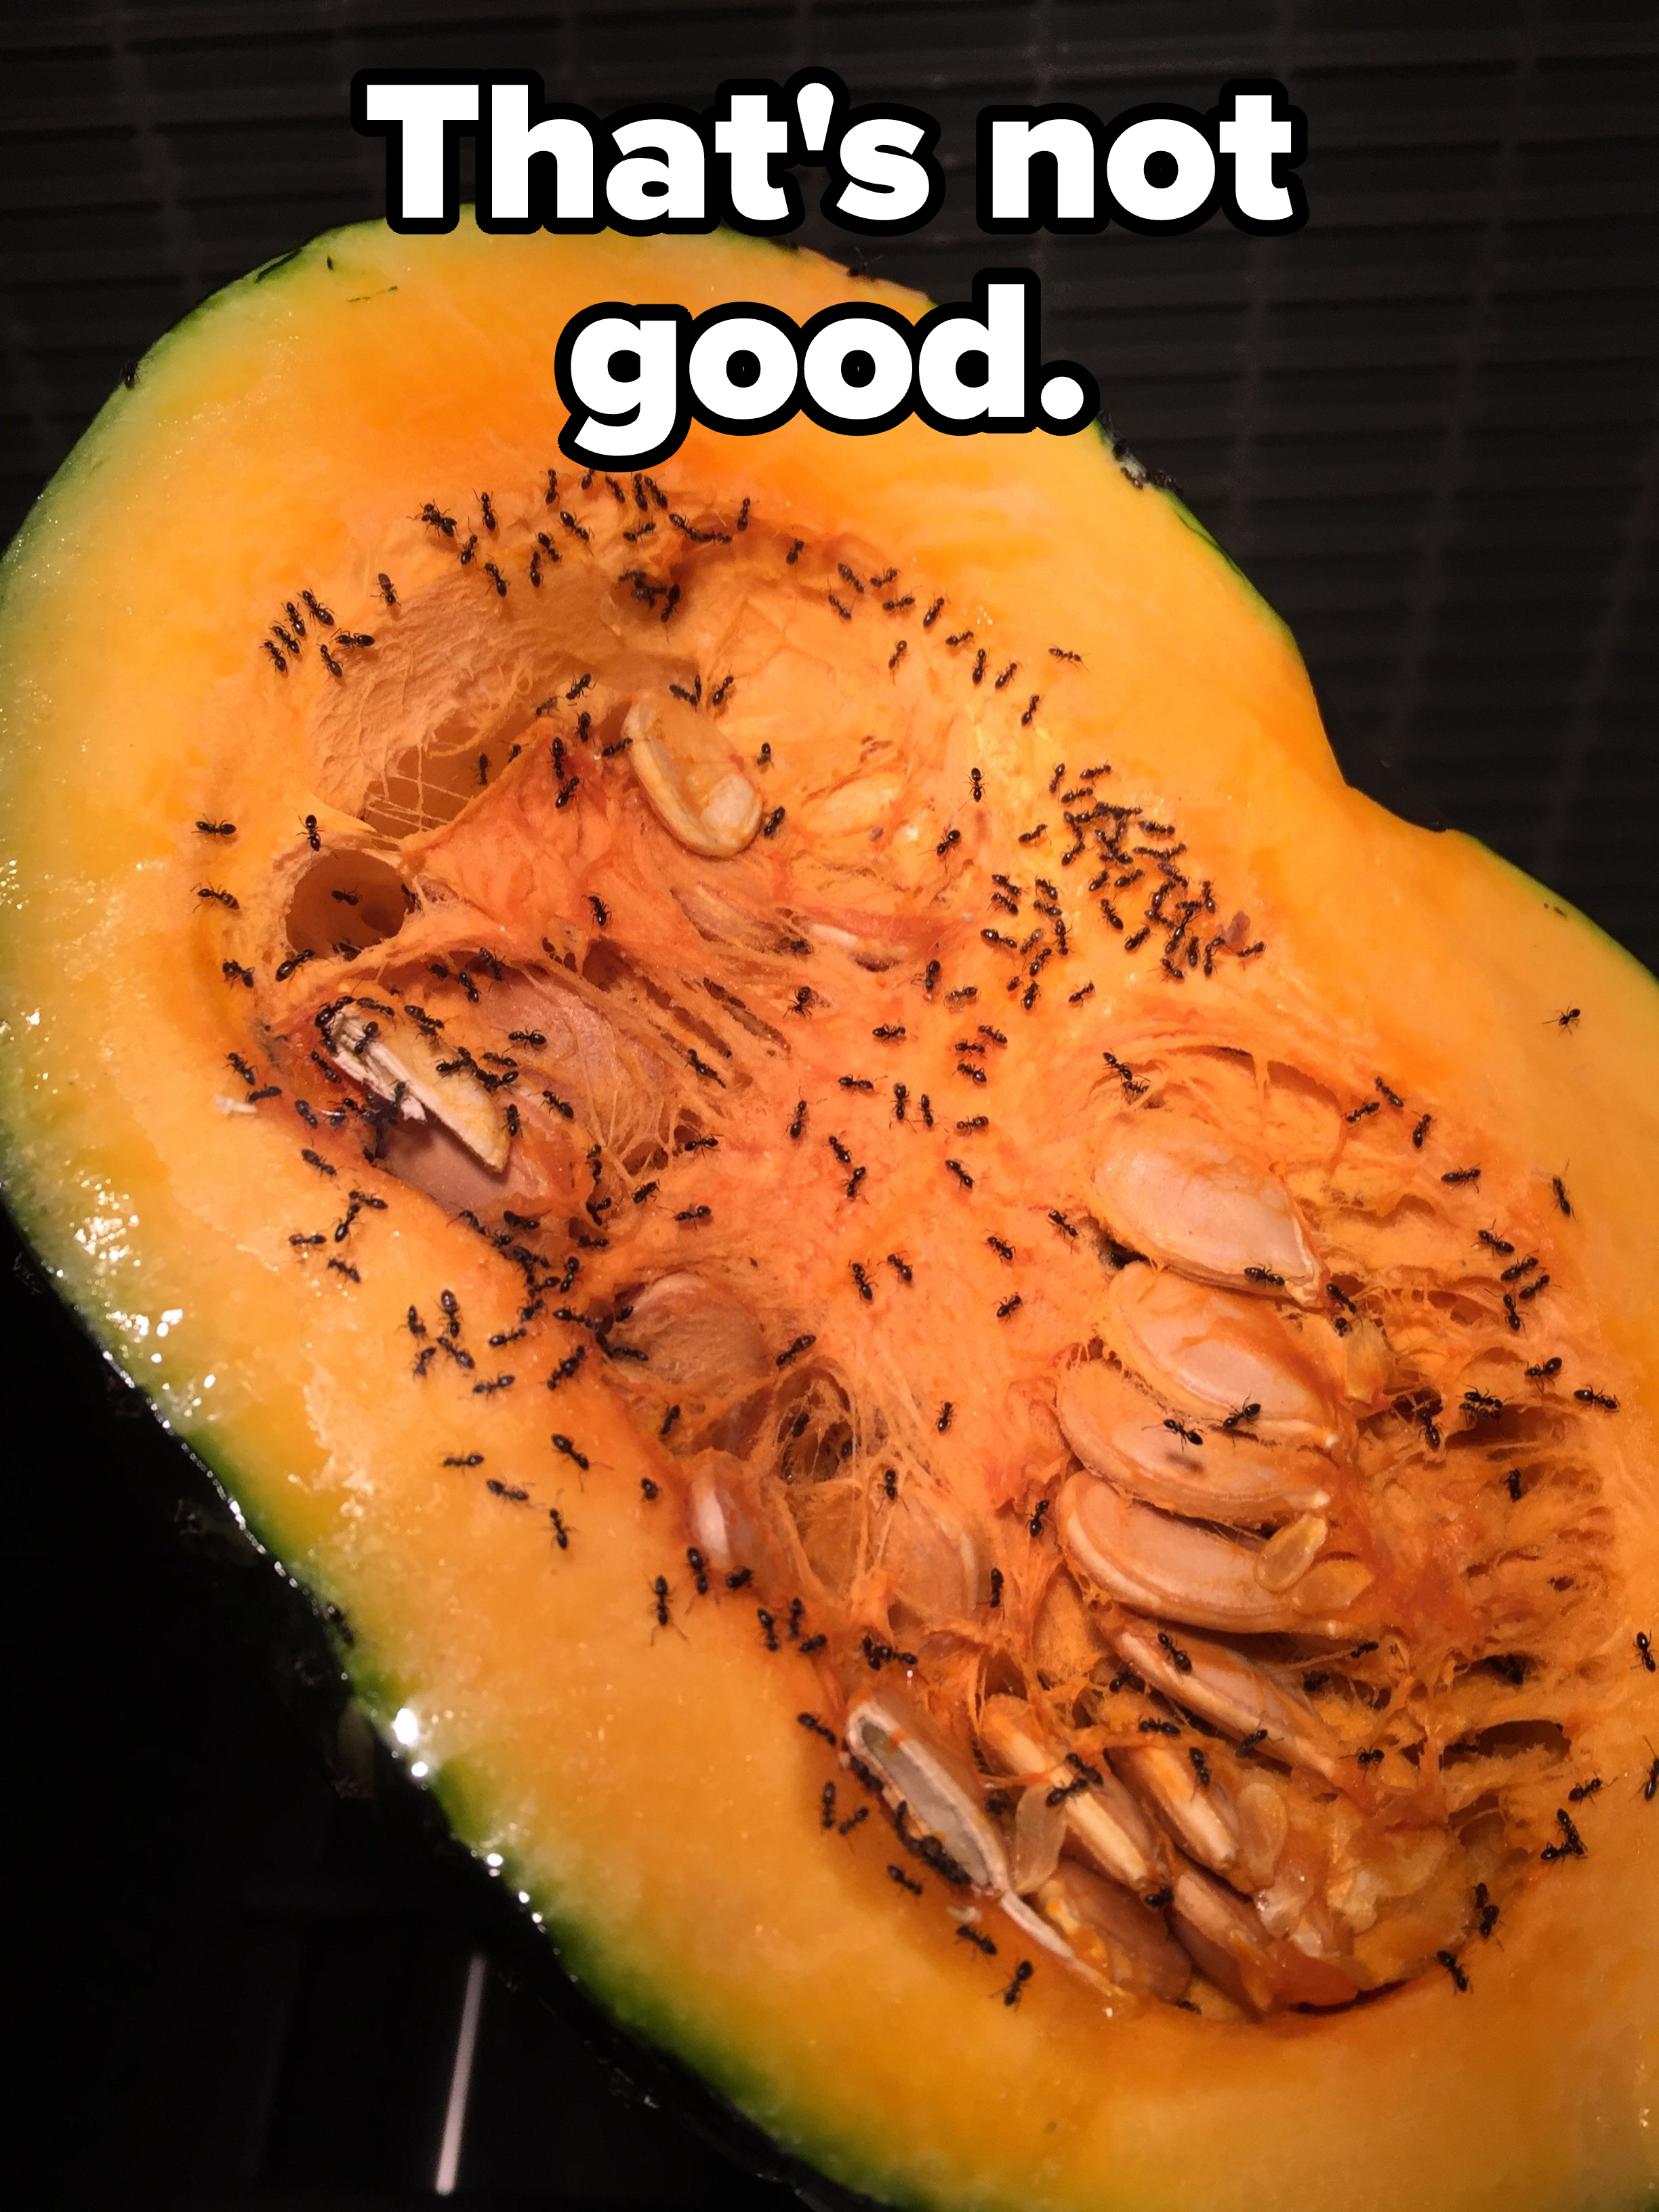 A cut squash with hundreds of ants in it